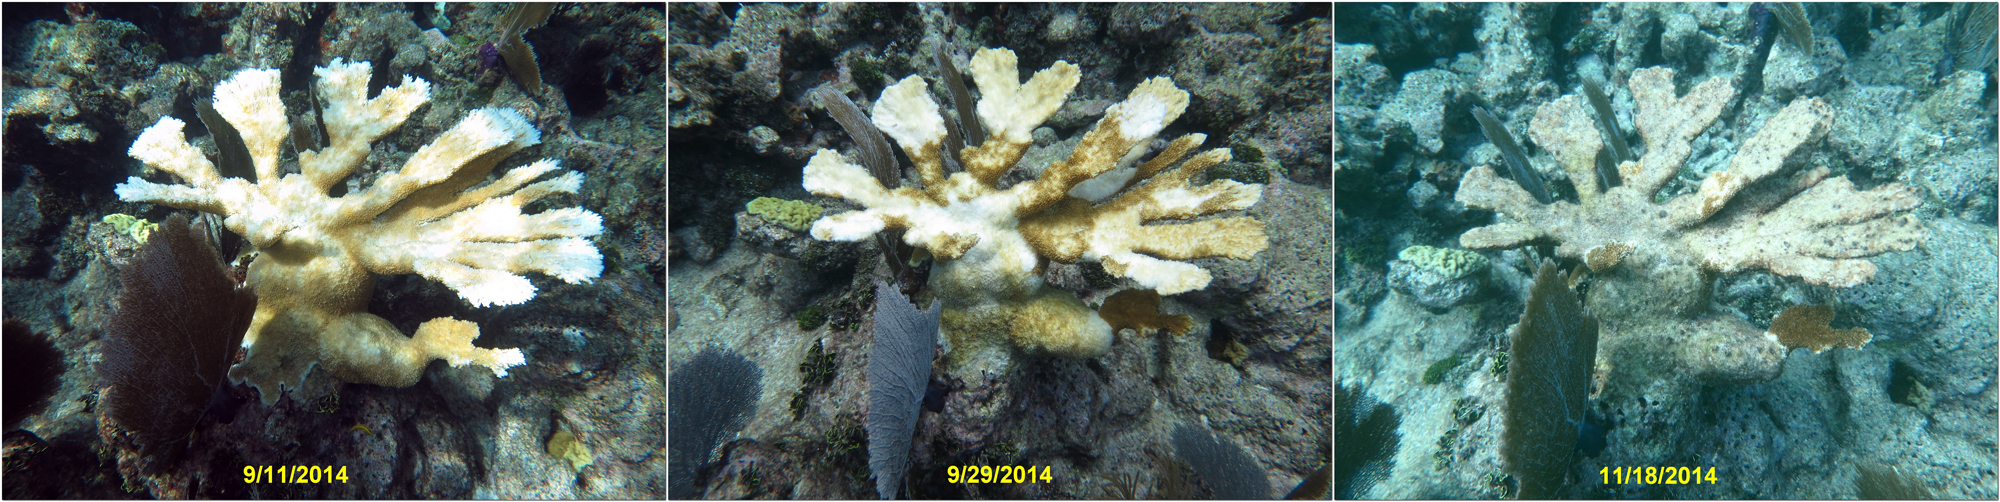 The progressive effects of bleaching on a once healthy elkhorn coral (Acropora palmata) during a recent bleaching event in Florida. 